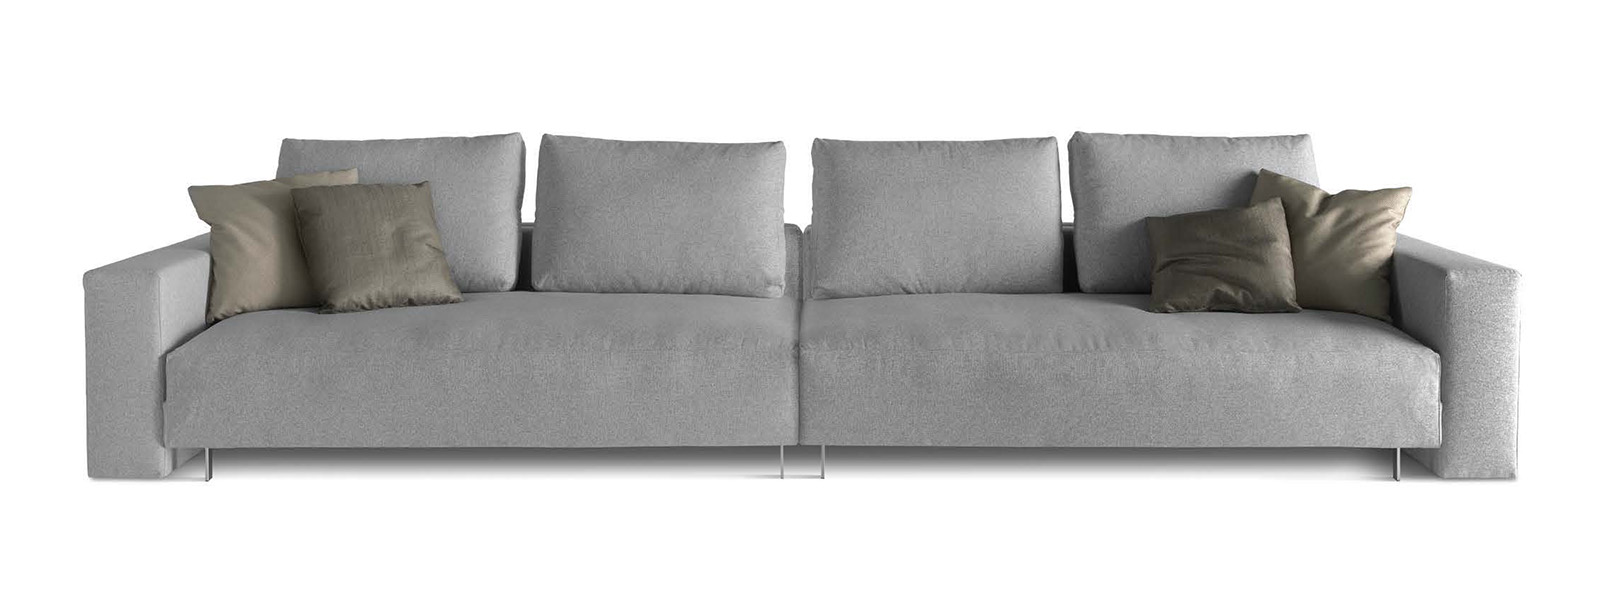 Luxury Sofa Arnold by Latorre